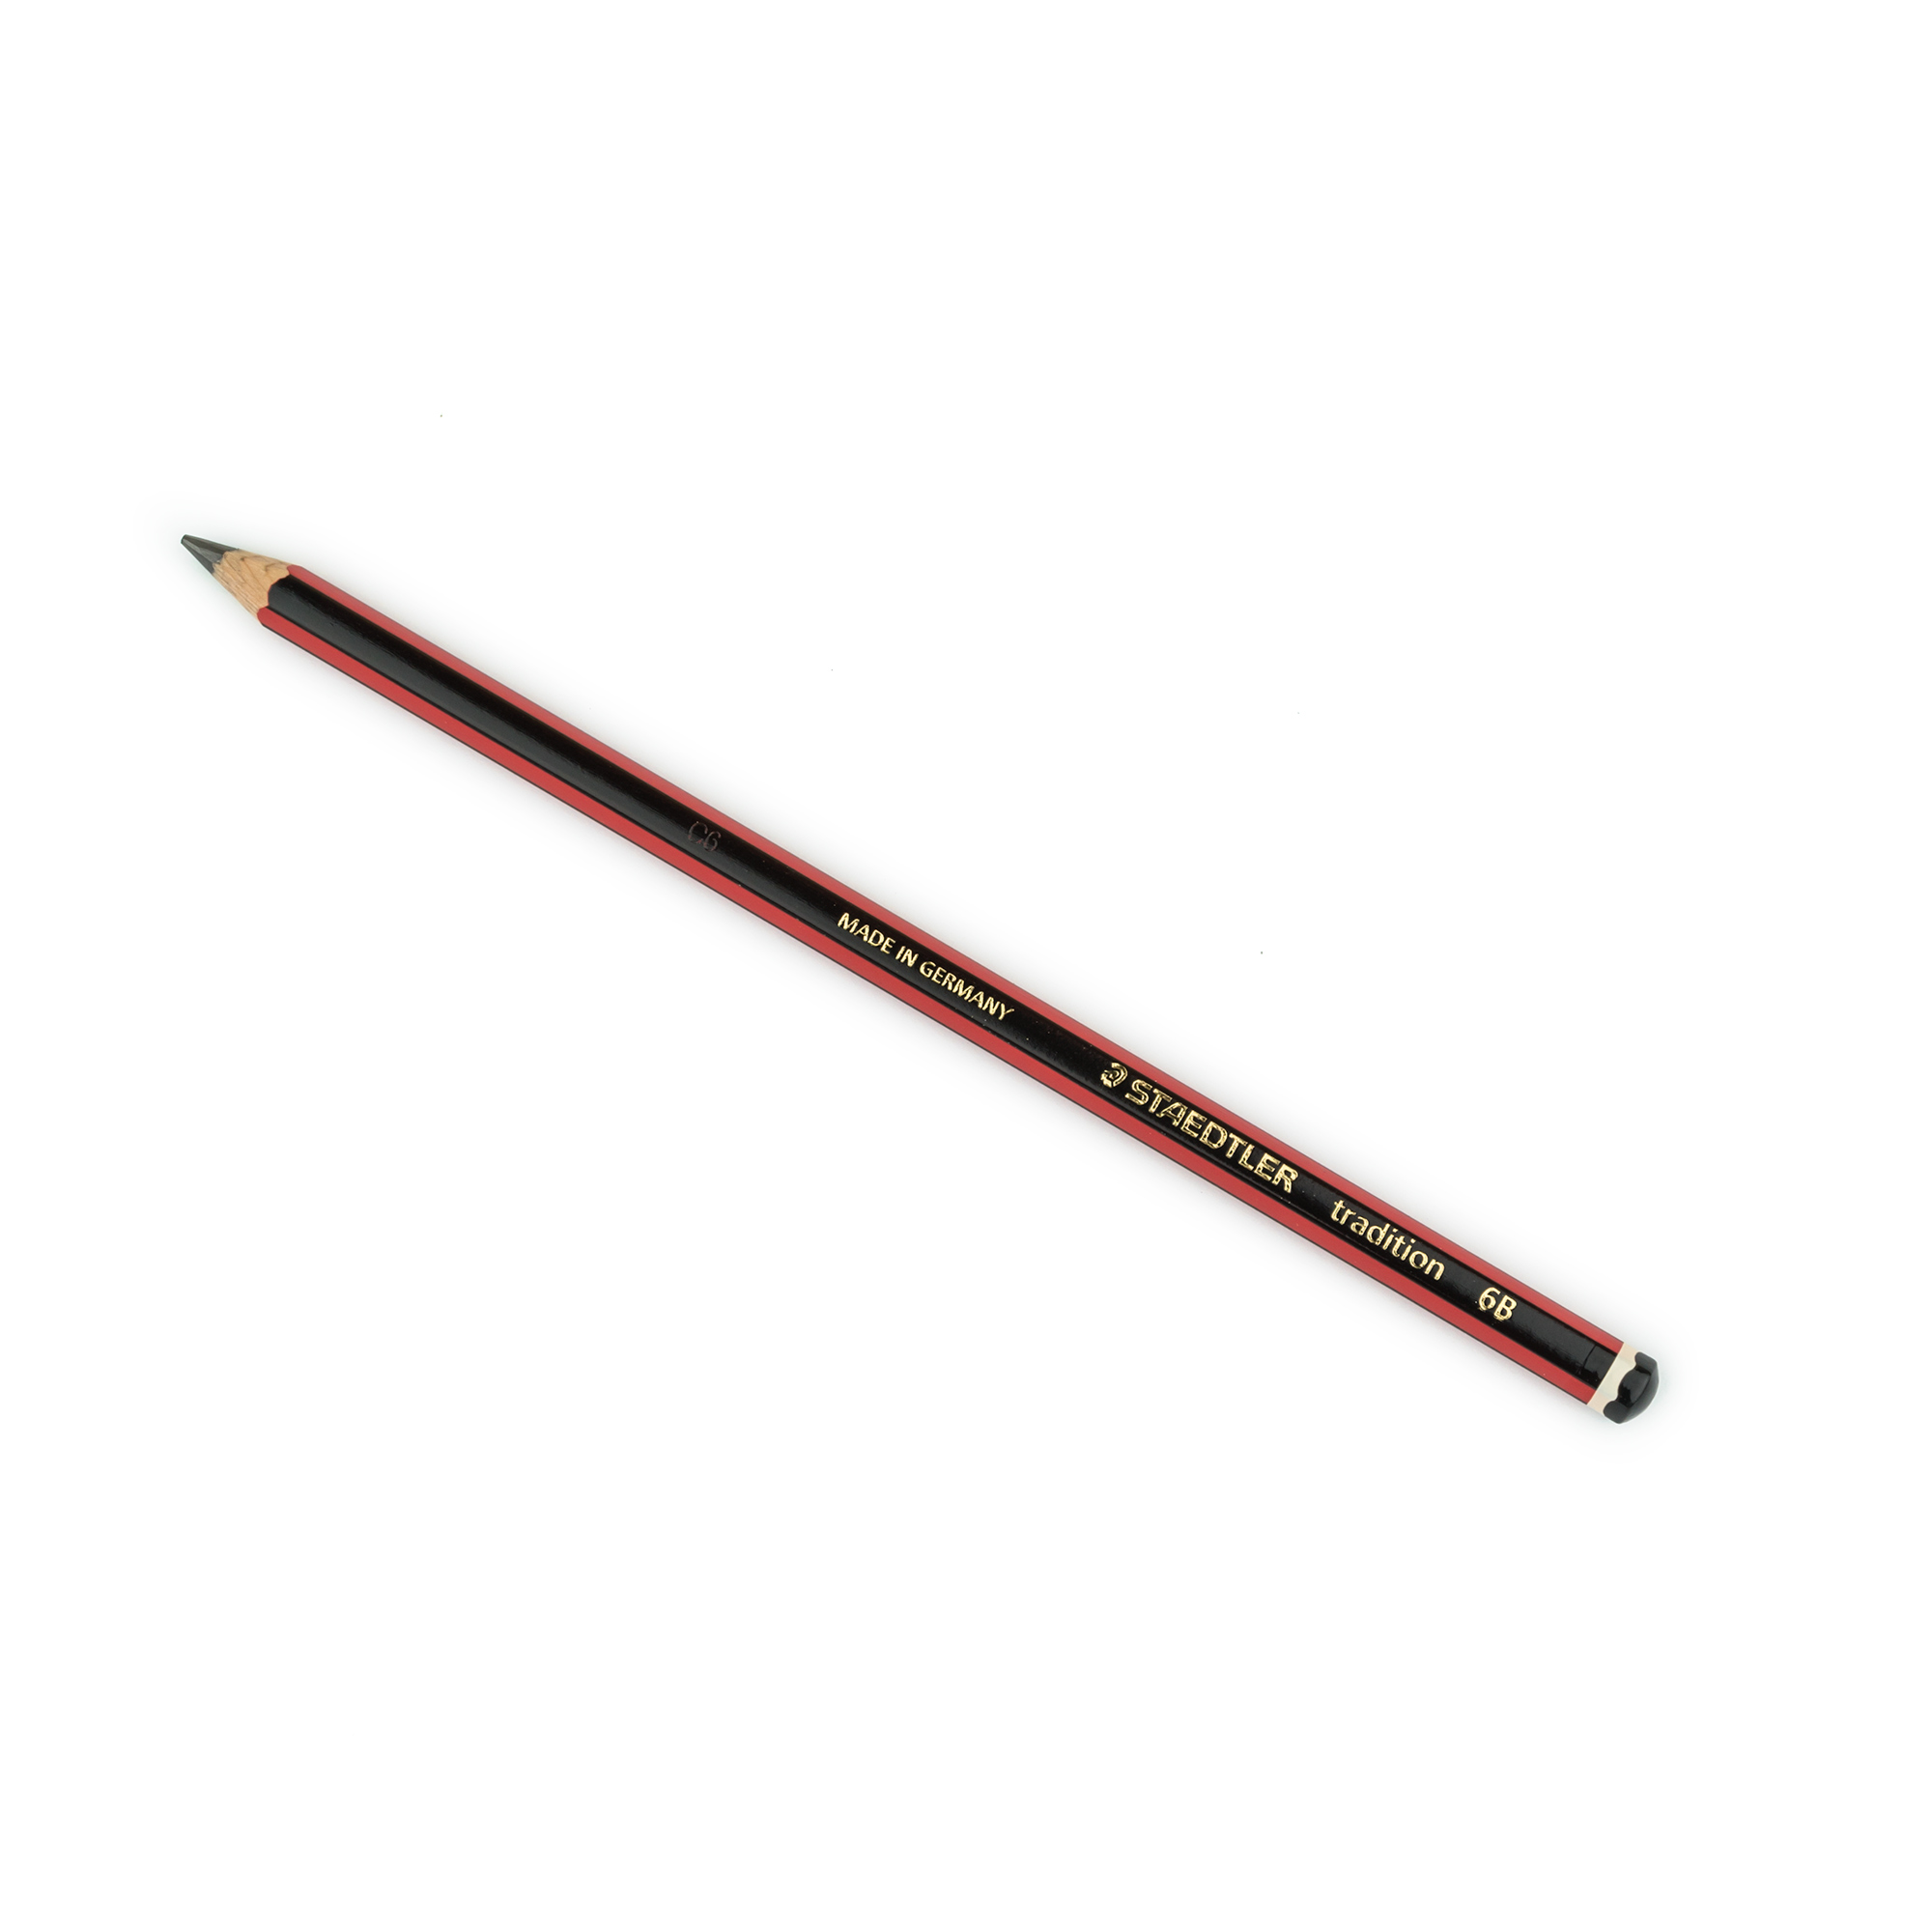 STAEDTLER 6B TRADITION PENCIL